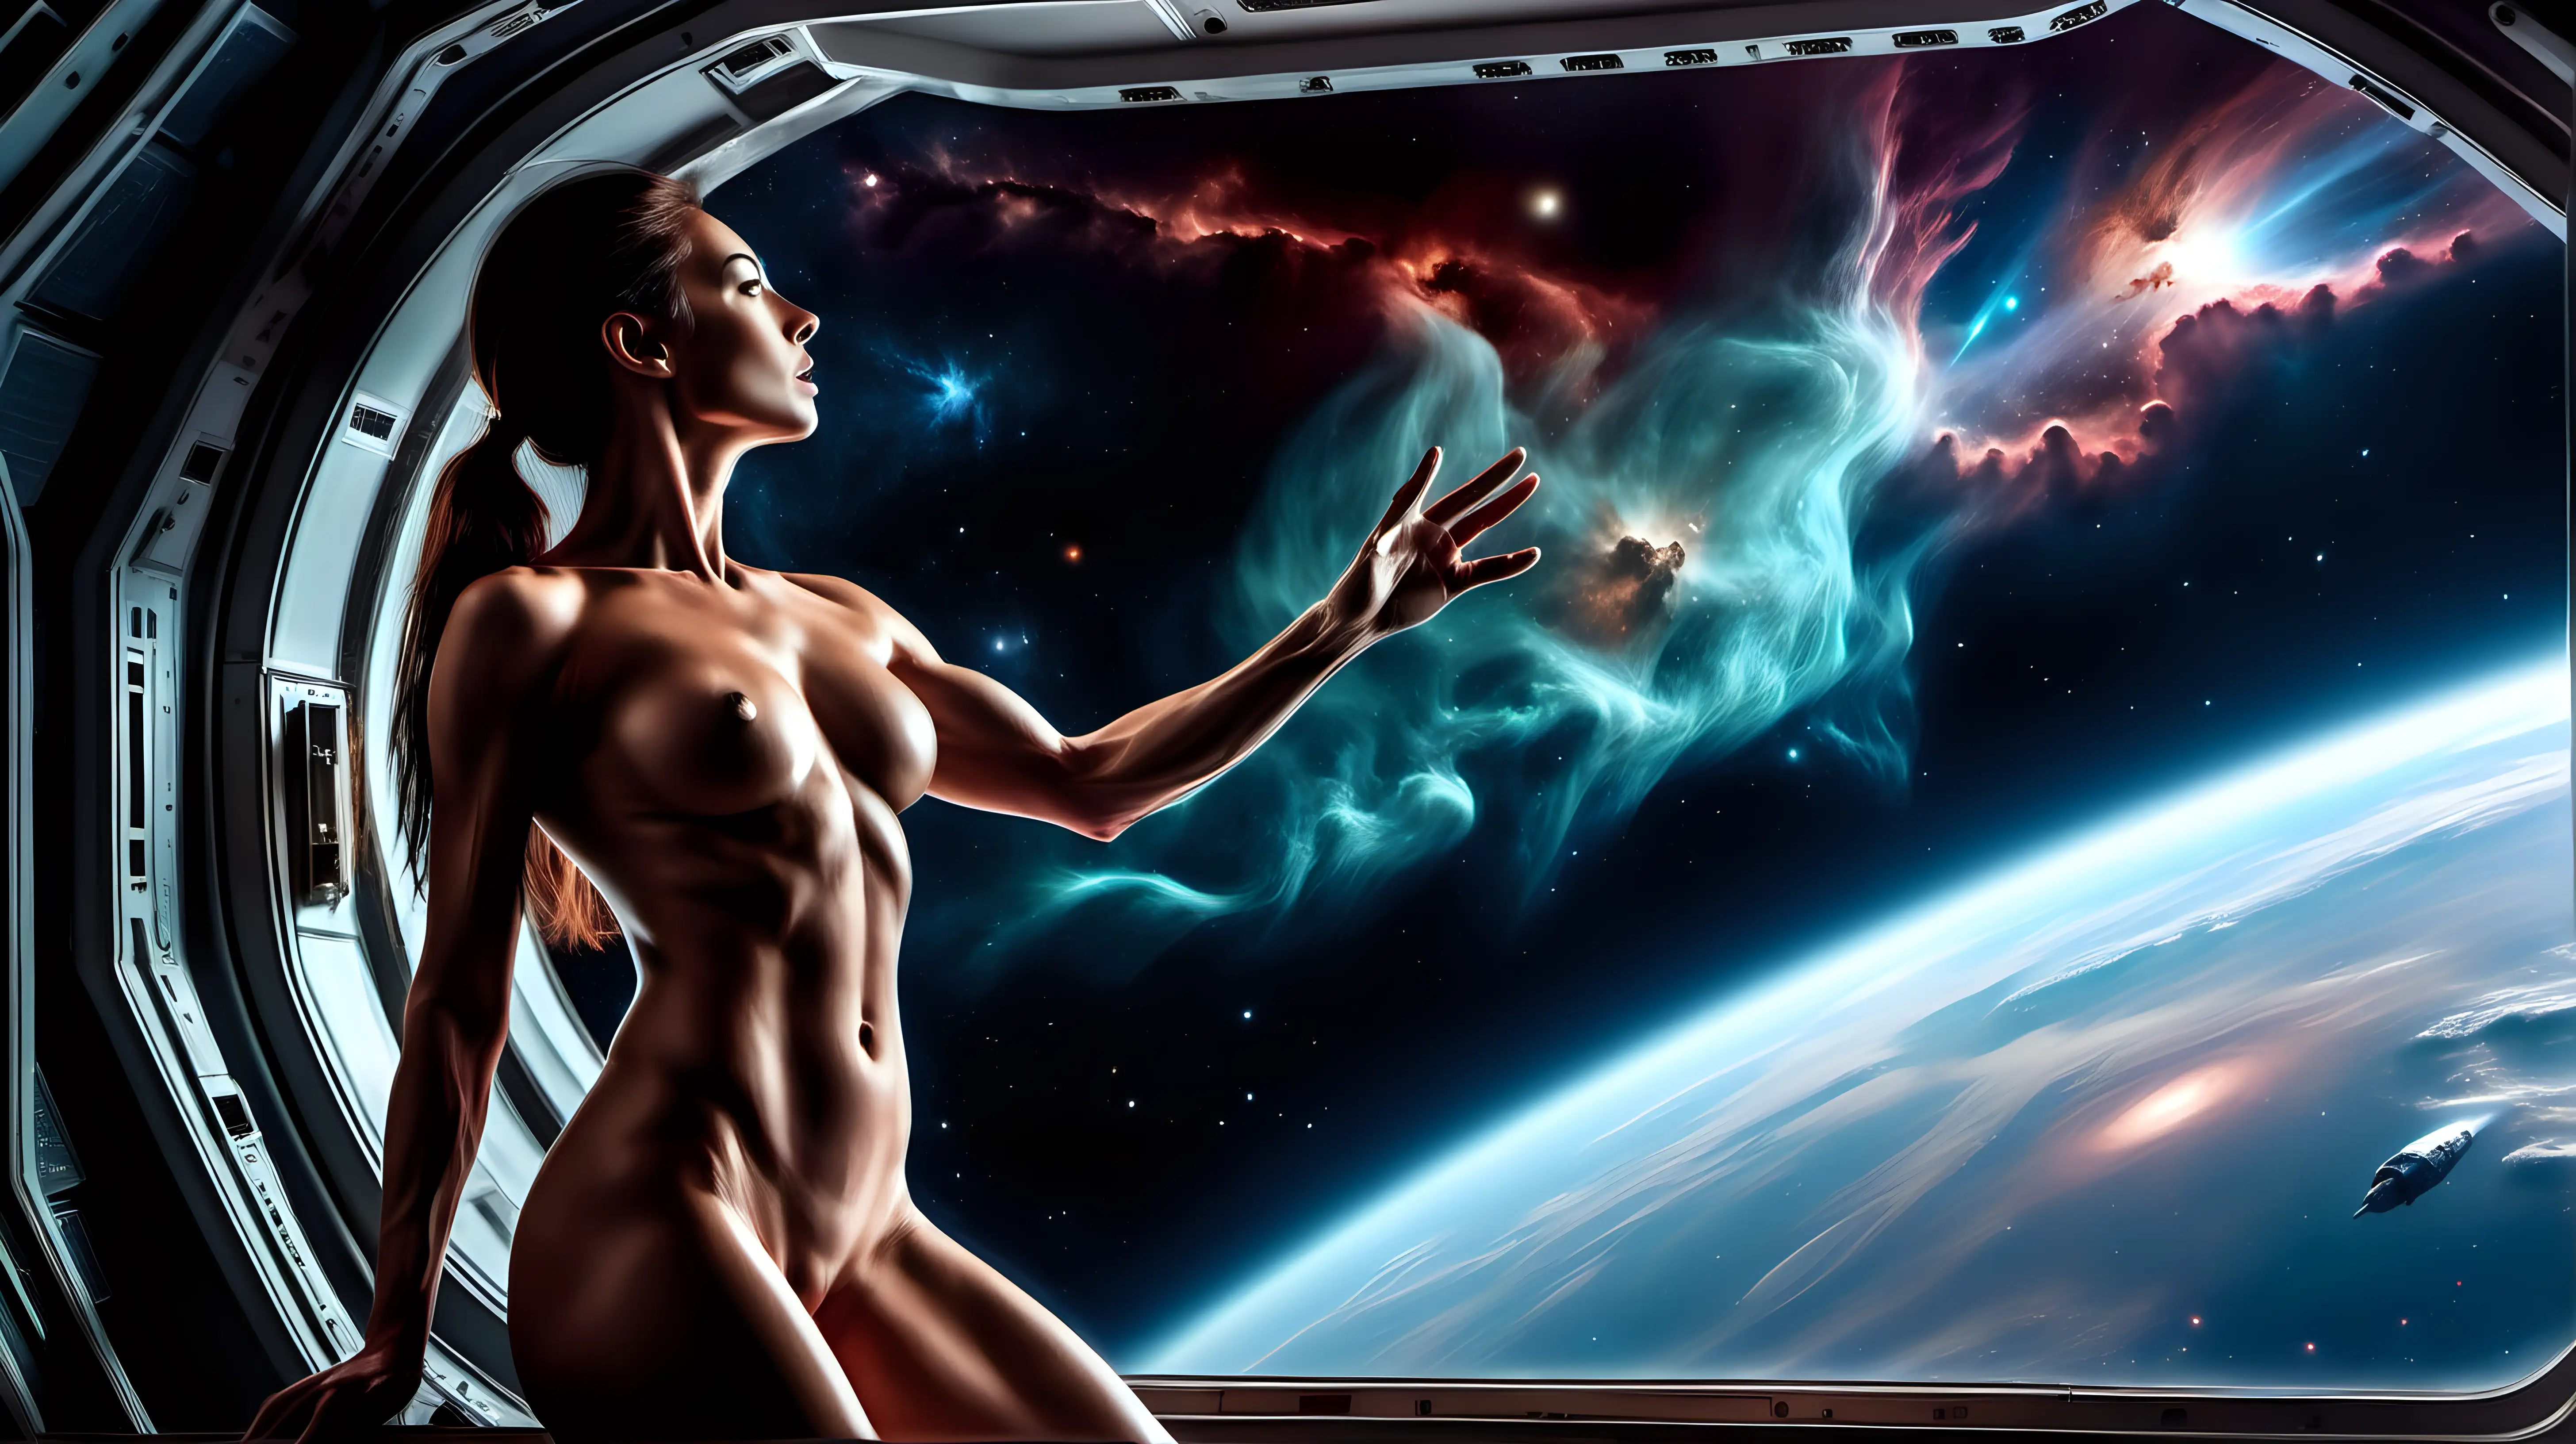 Muscular Woman Observing Nebula in Zero Gravity from Spaceship